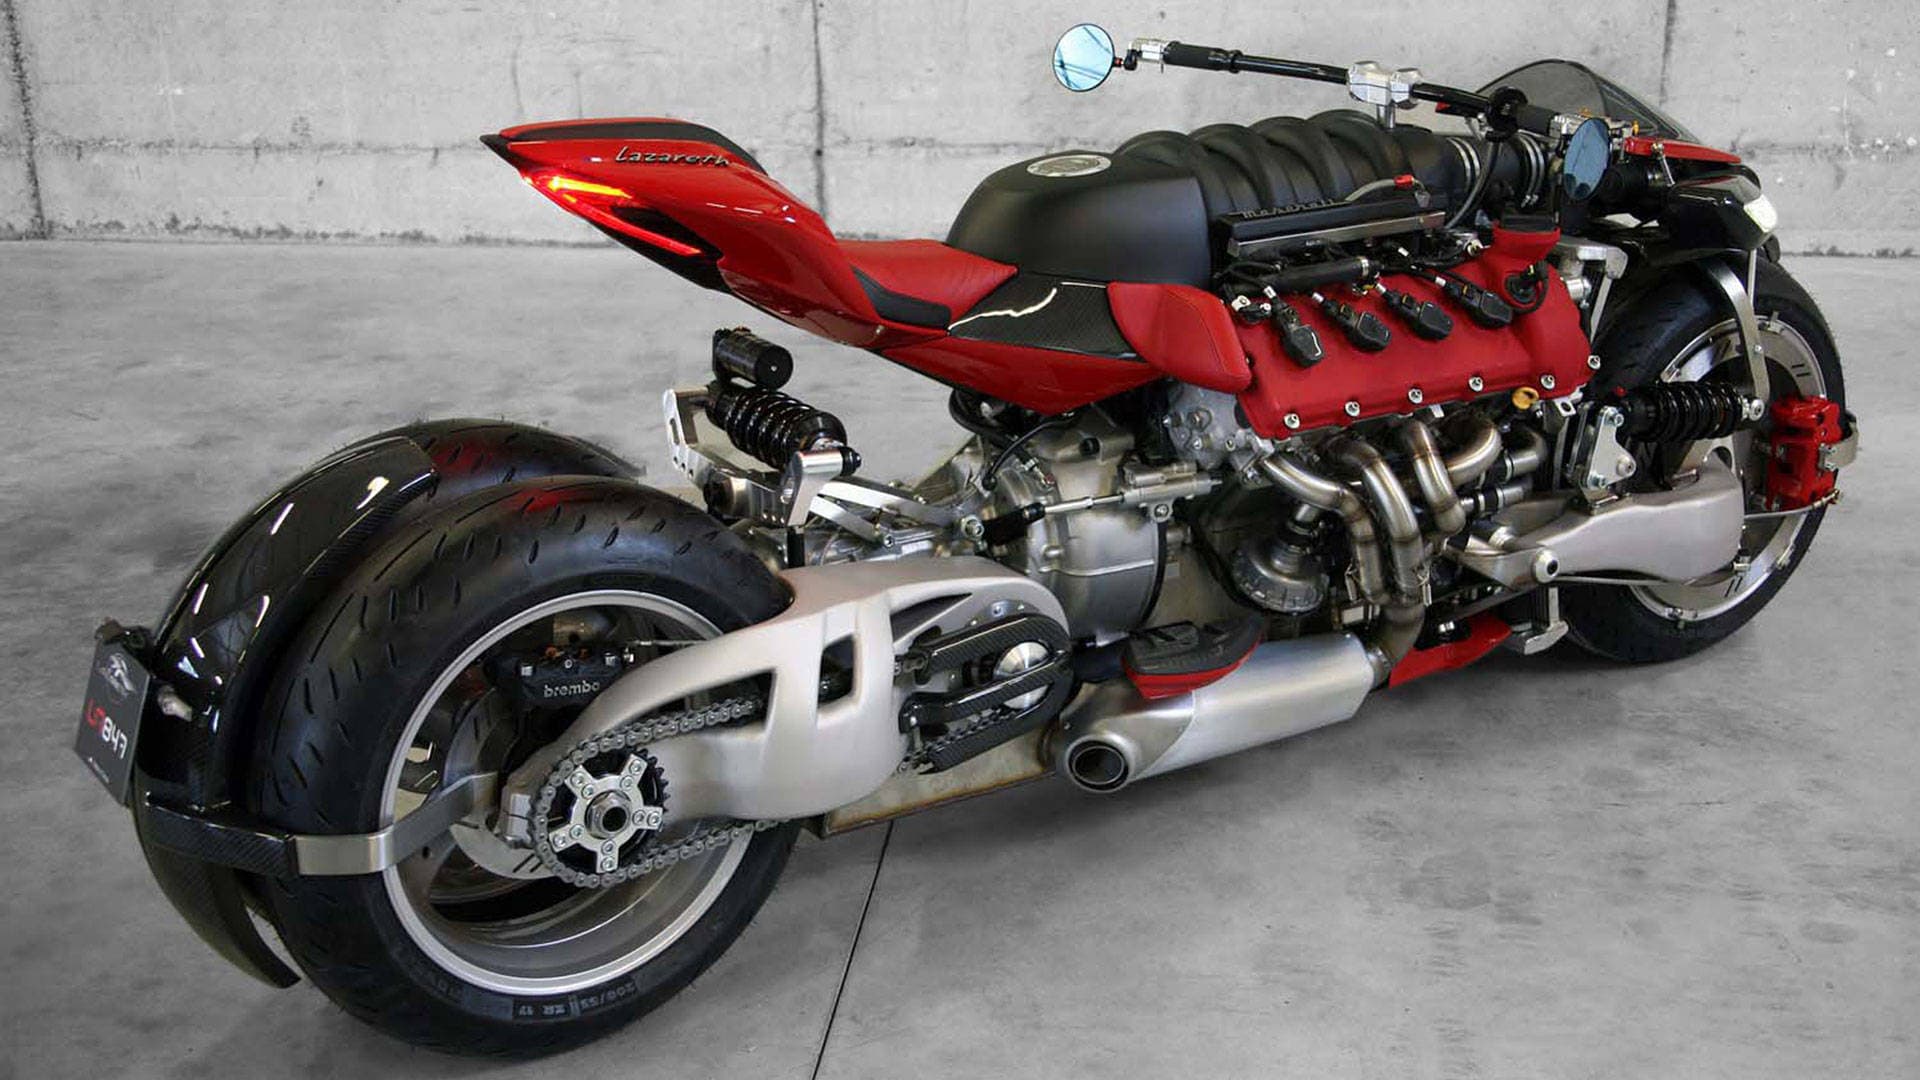 Watch the 470-Horsepower Maserati-Powered LM847 Motorcycle in Action